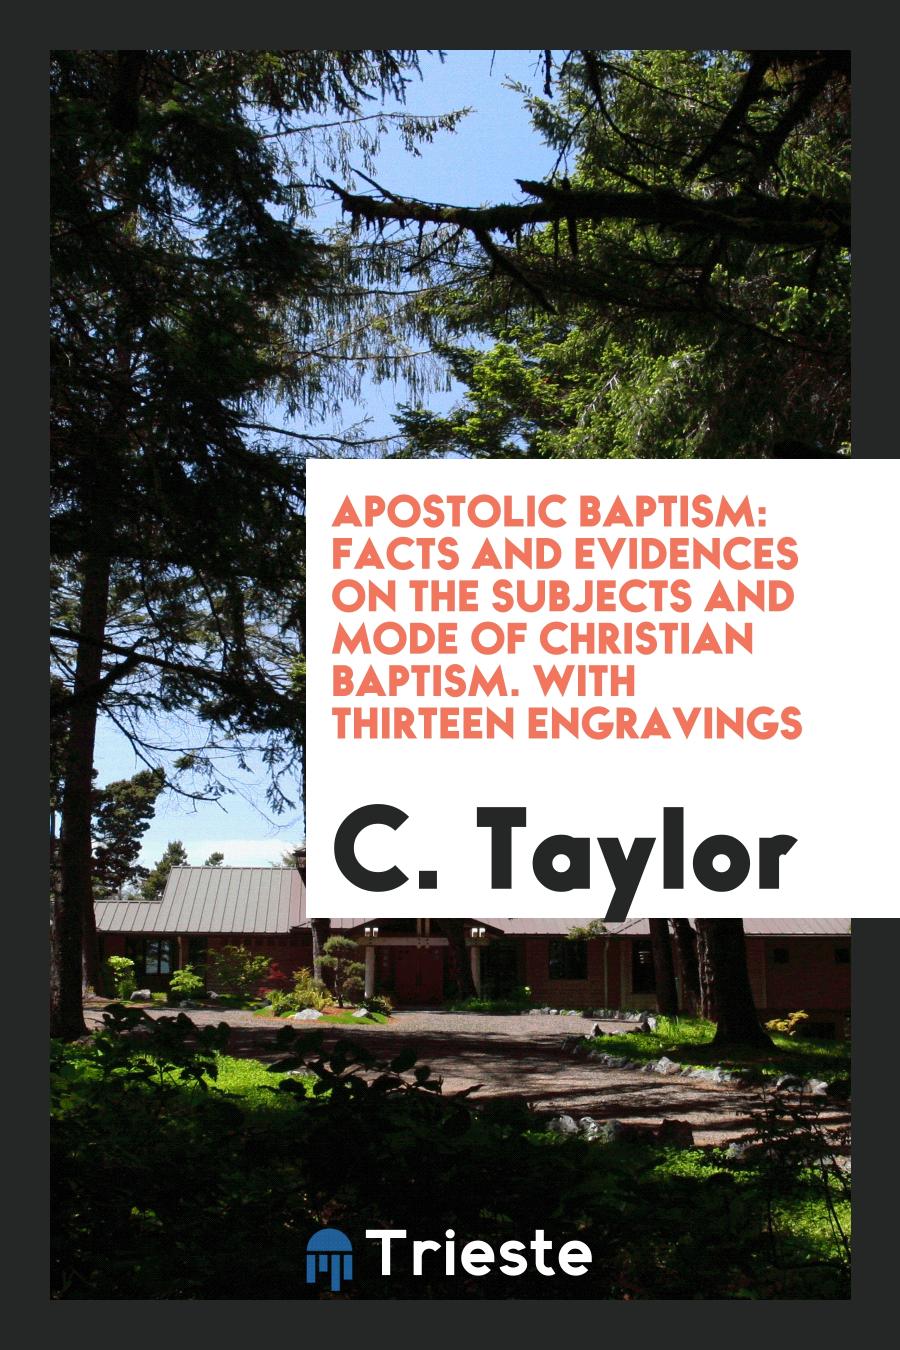 Apostolic Baptism: Facts and Evidences on the Subjects and Mode of Christian Baptism. With Thirteen Engravings